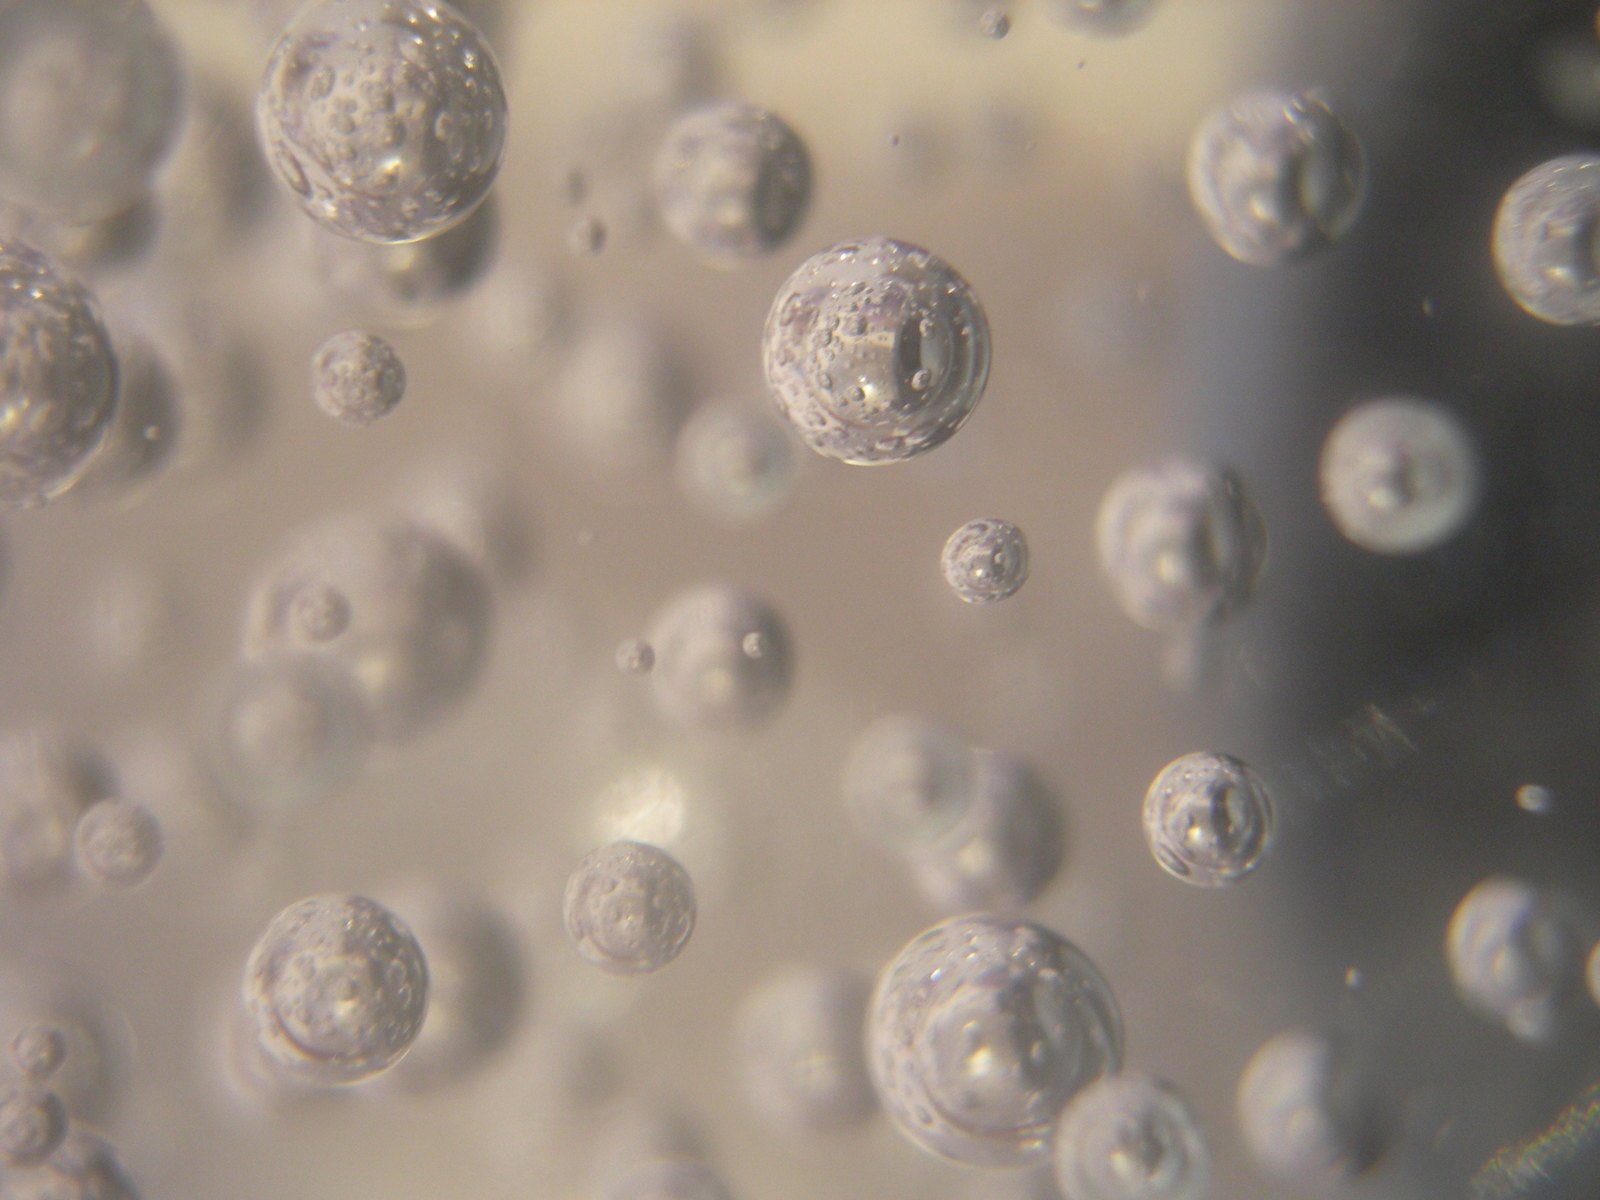 a close up of some water bubbles